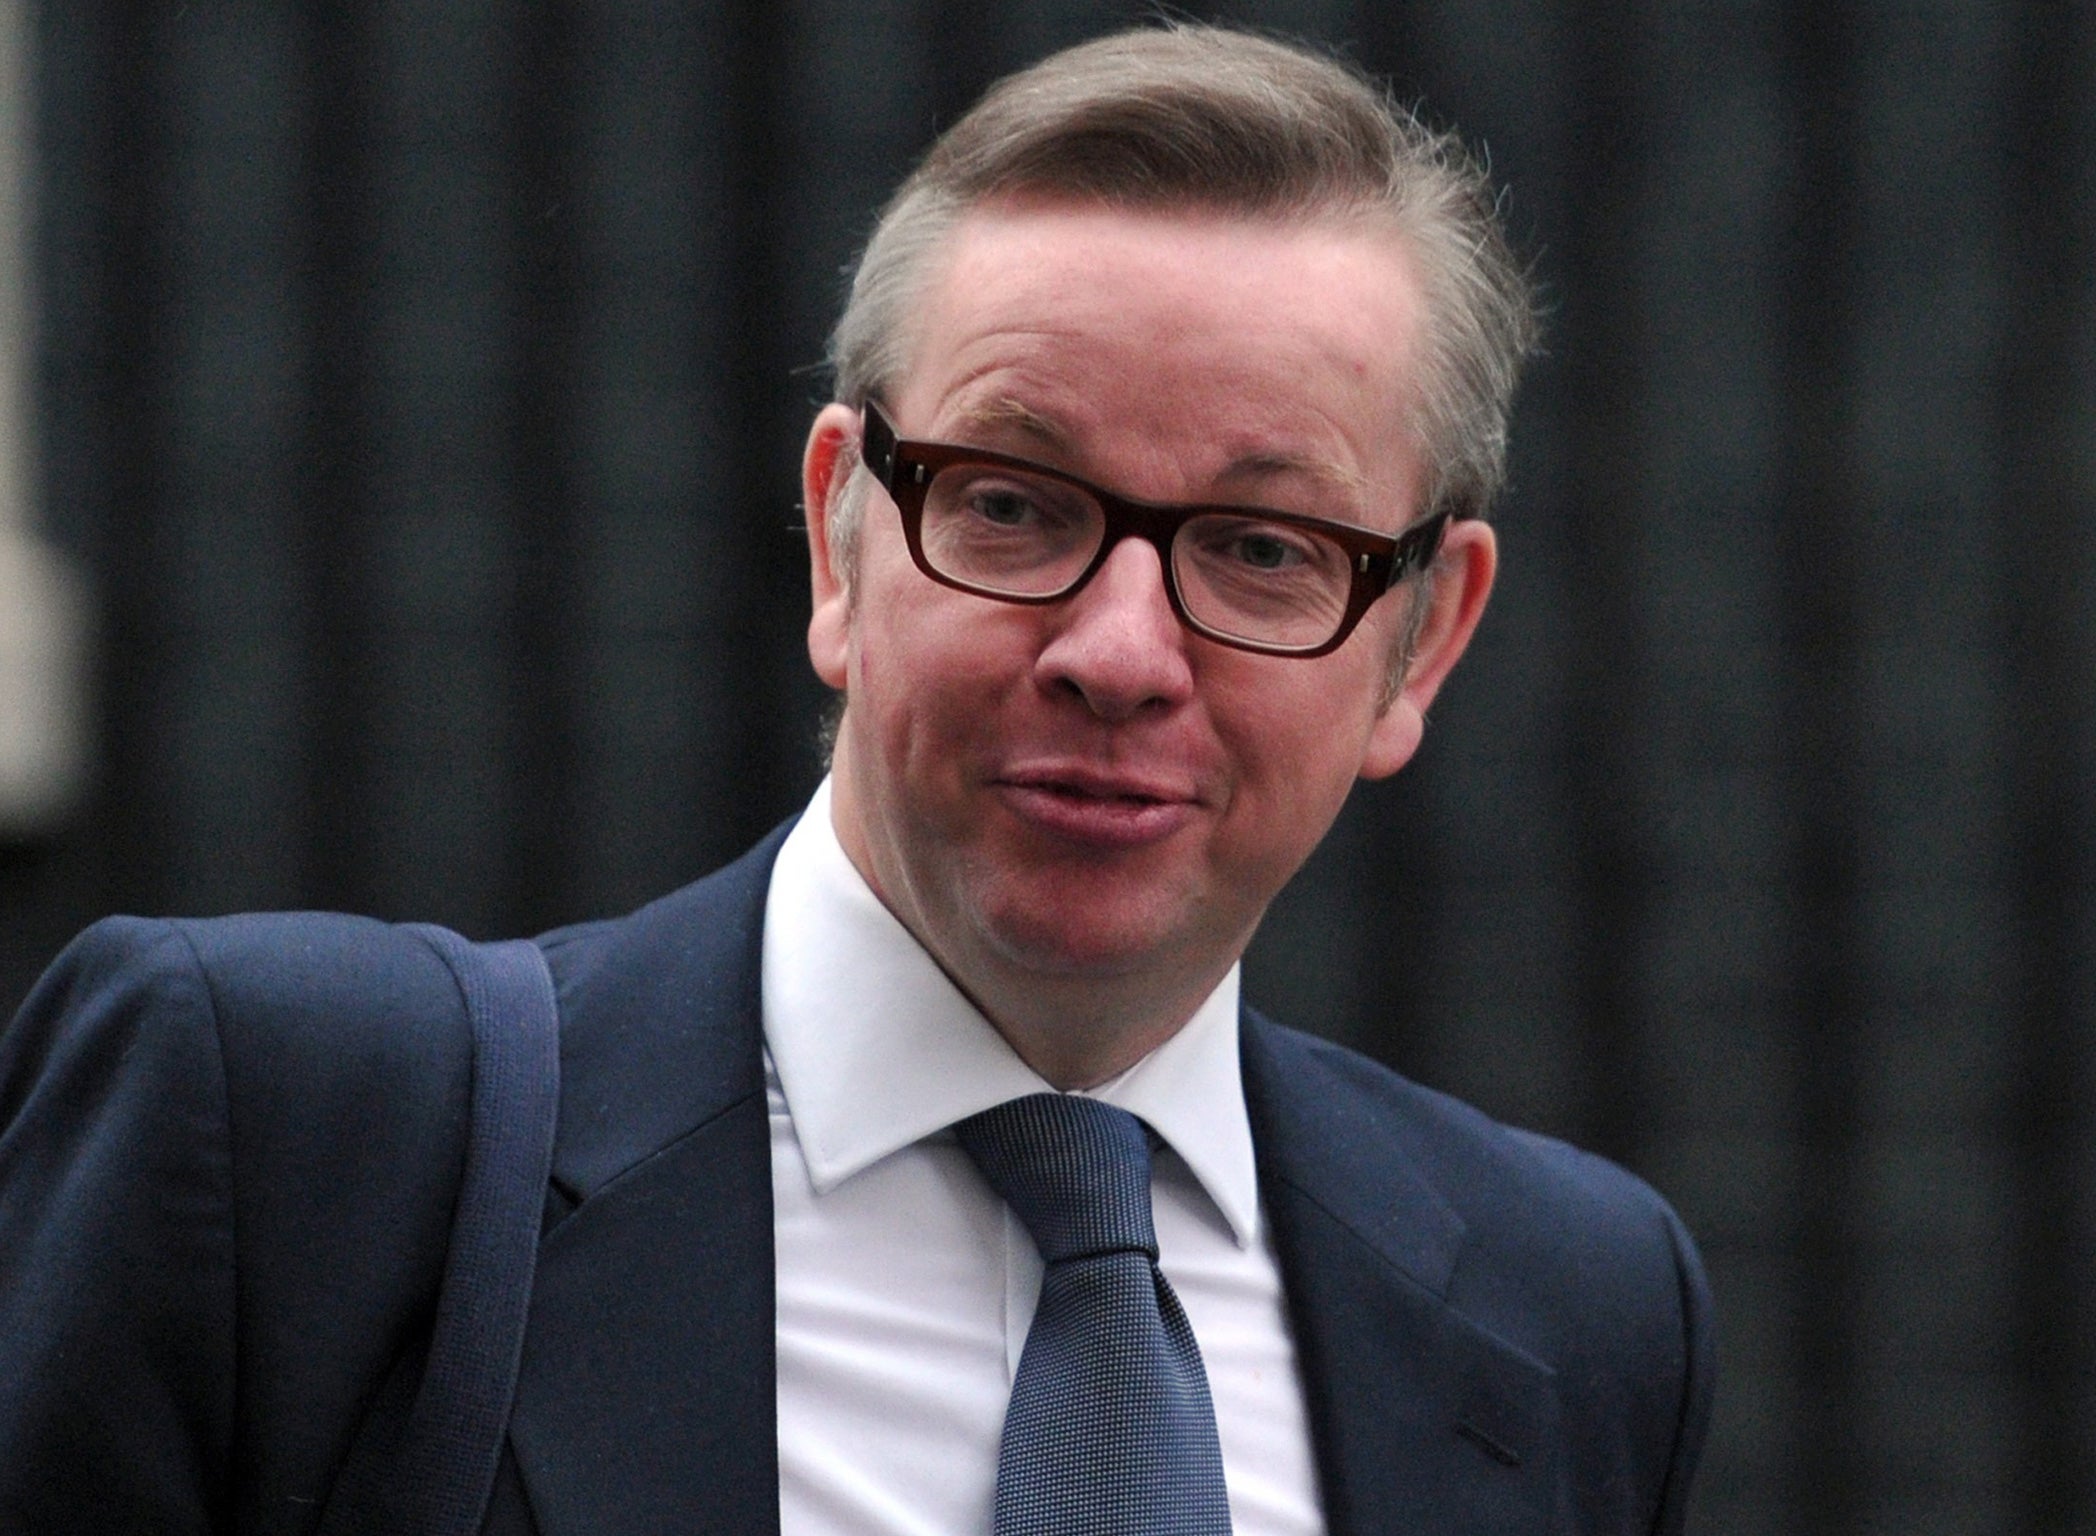 Gove said yesterday that the incident sent ‘a dreadful signal’